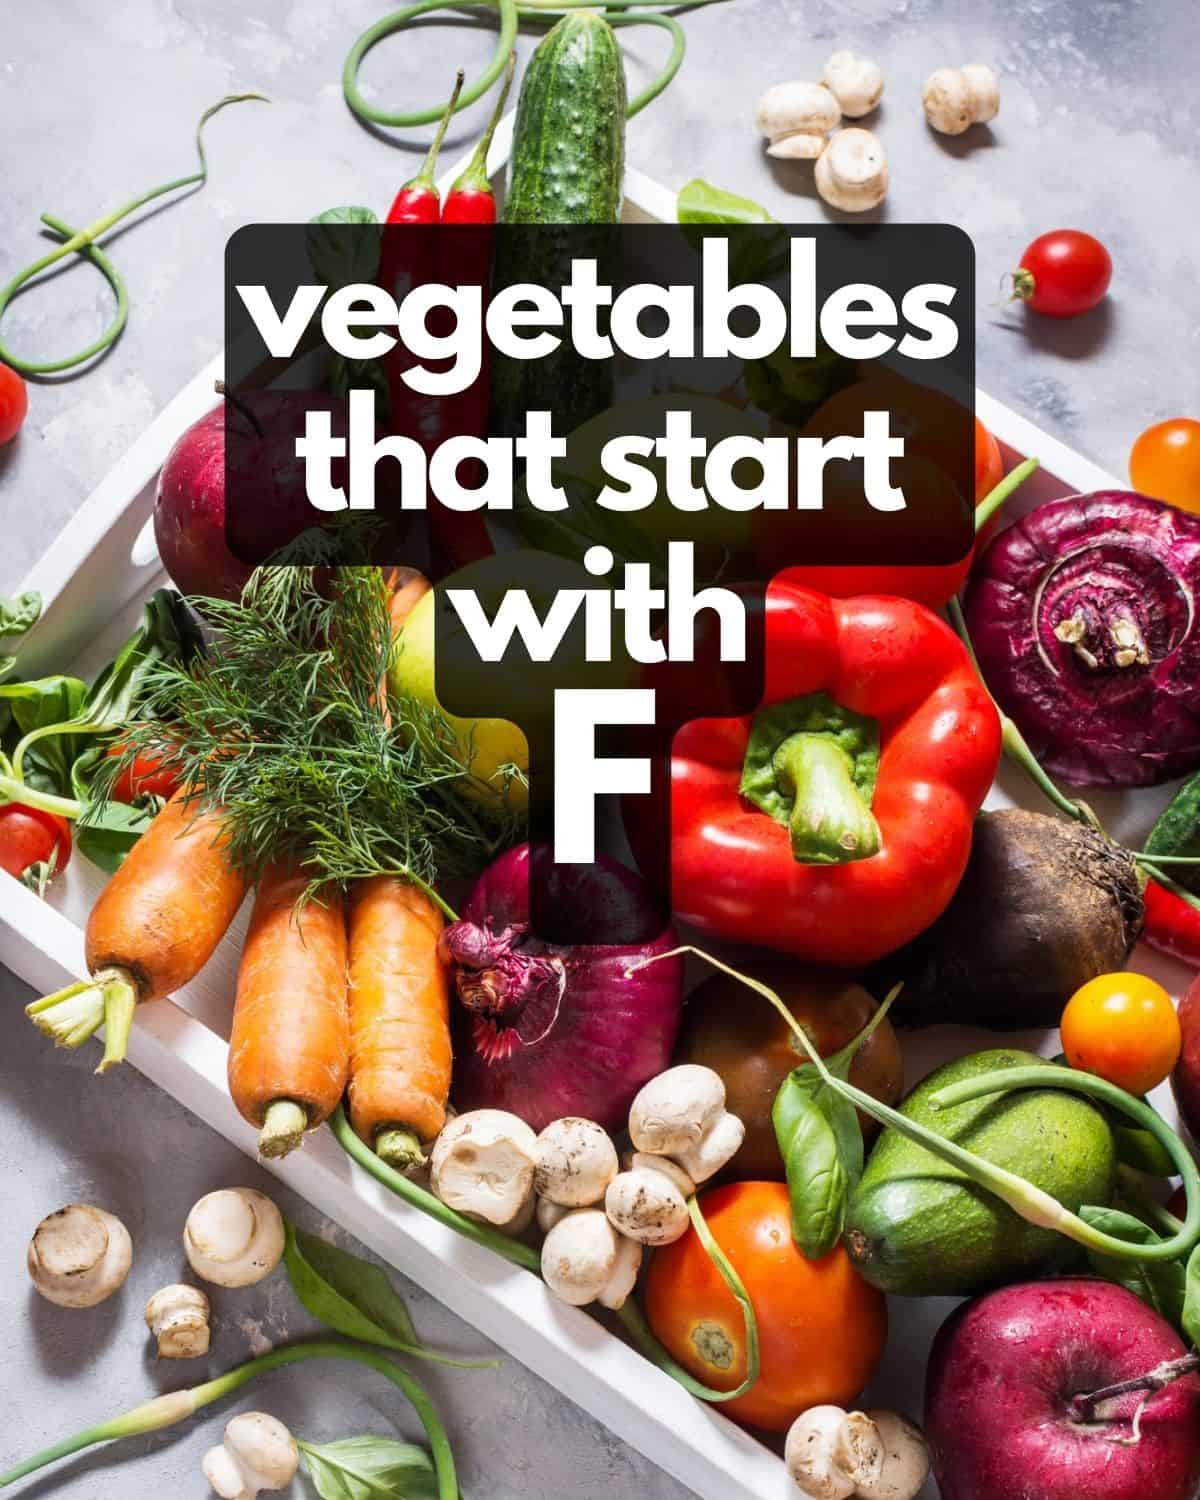 Table of vegetables, plus text: Vegetables that start with F.